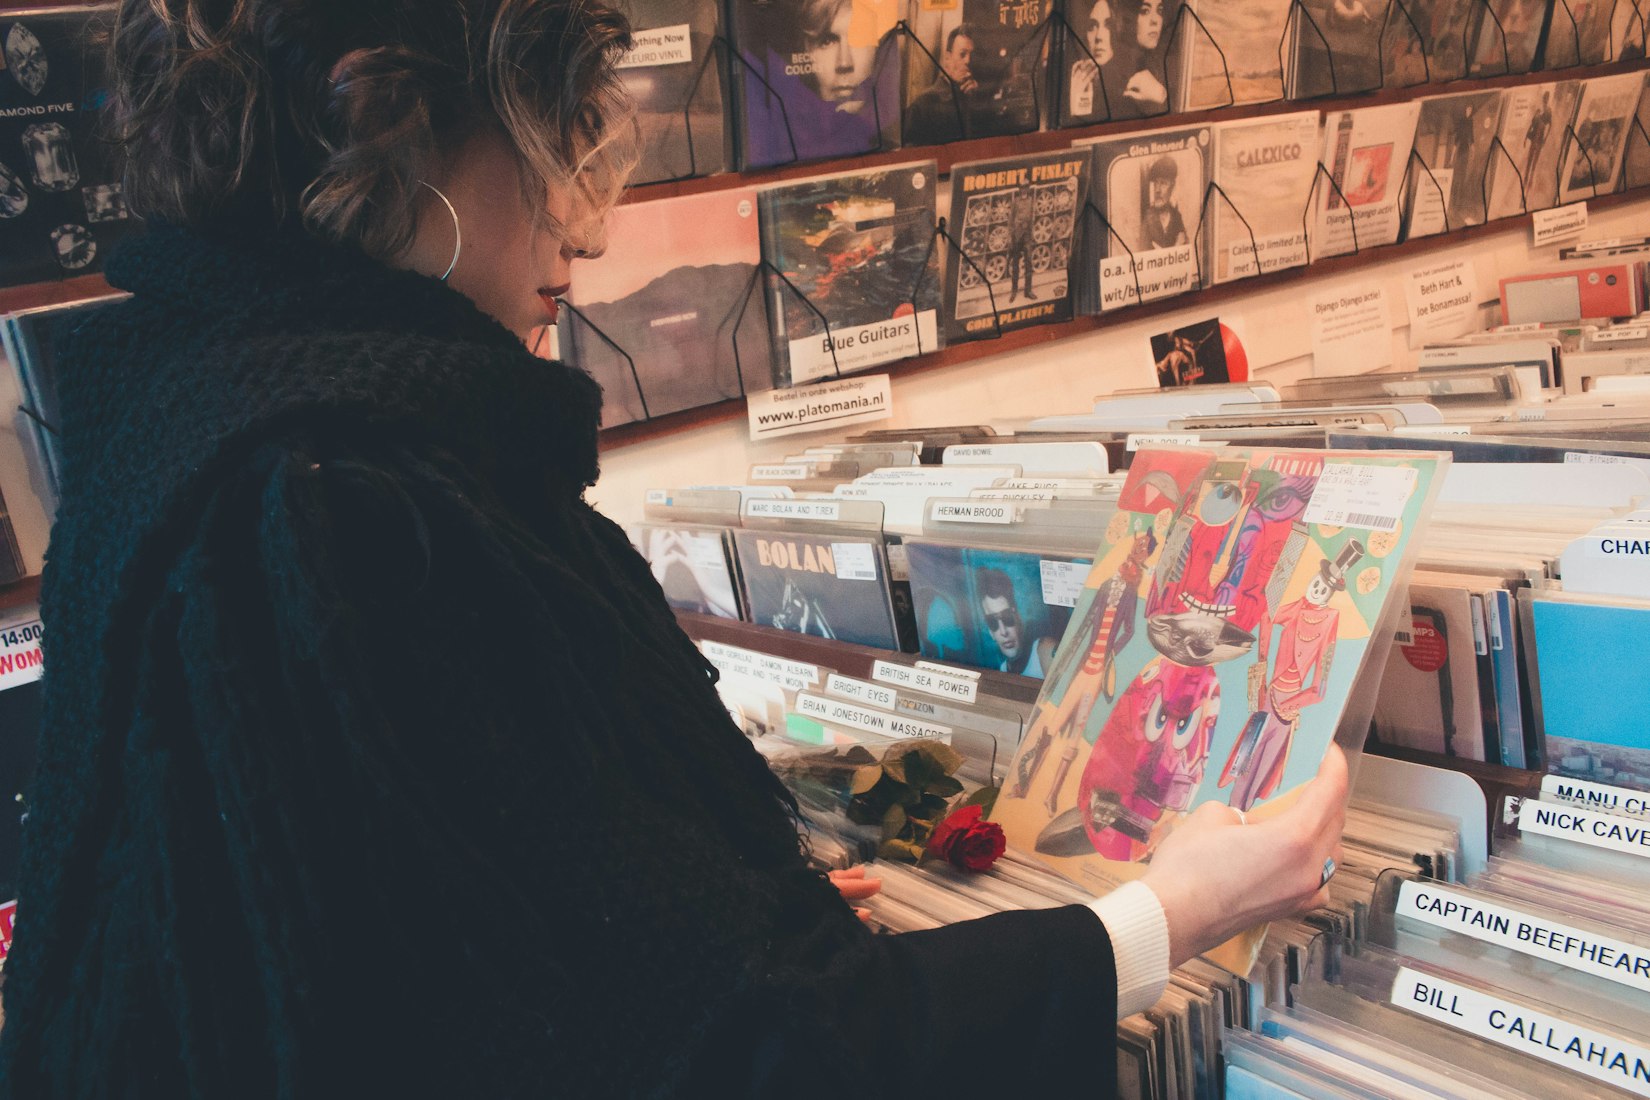 Girl holding record in record store